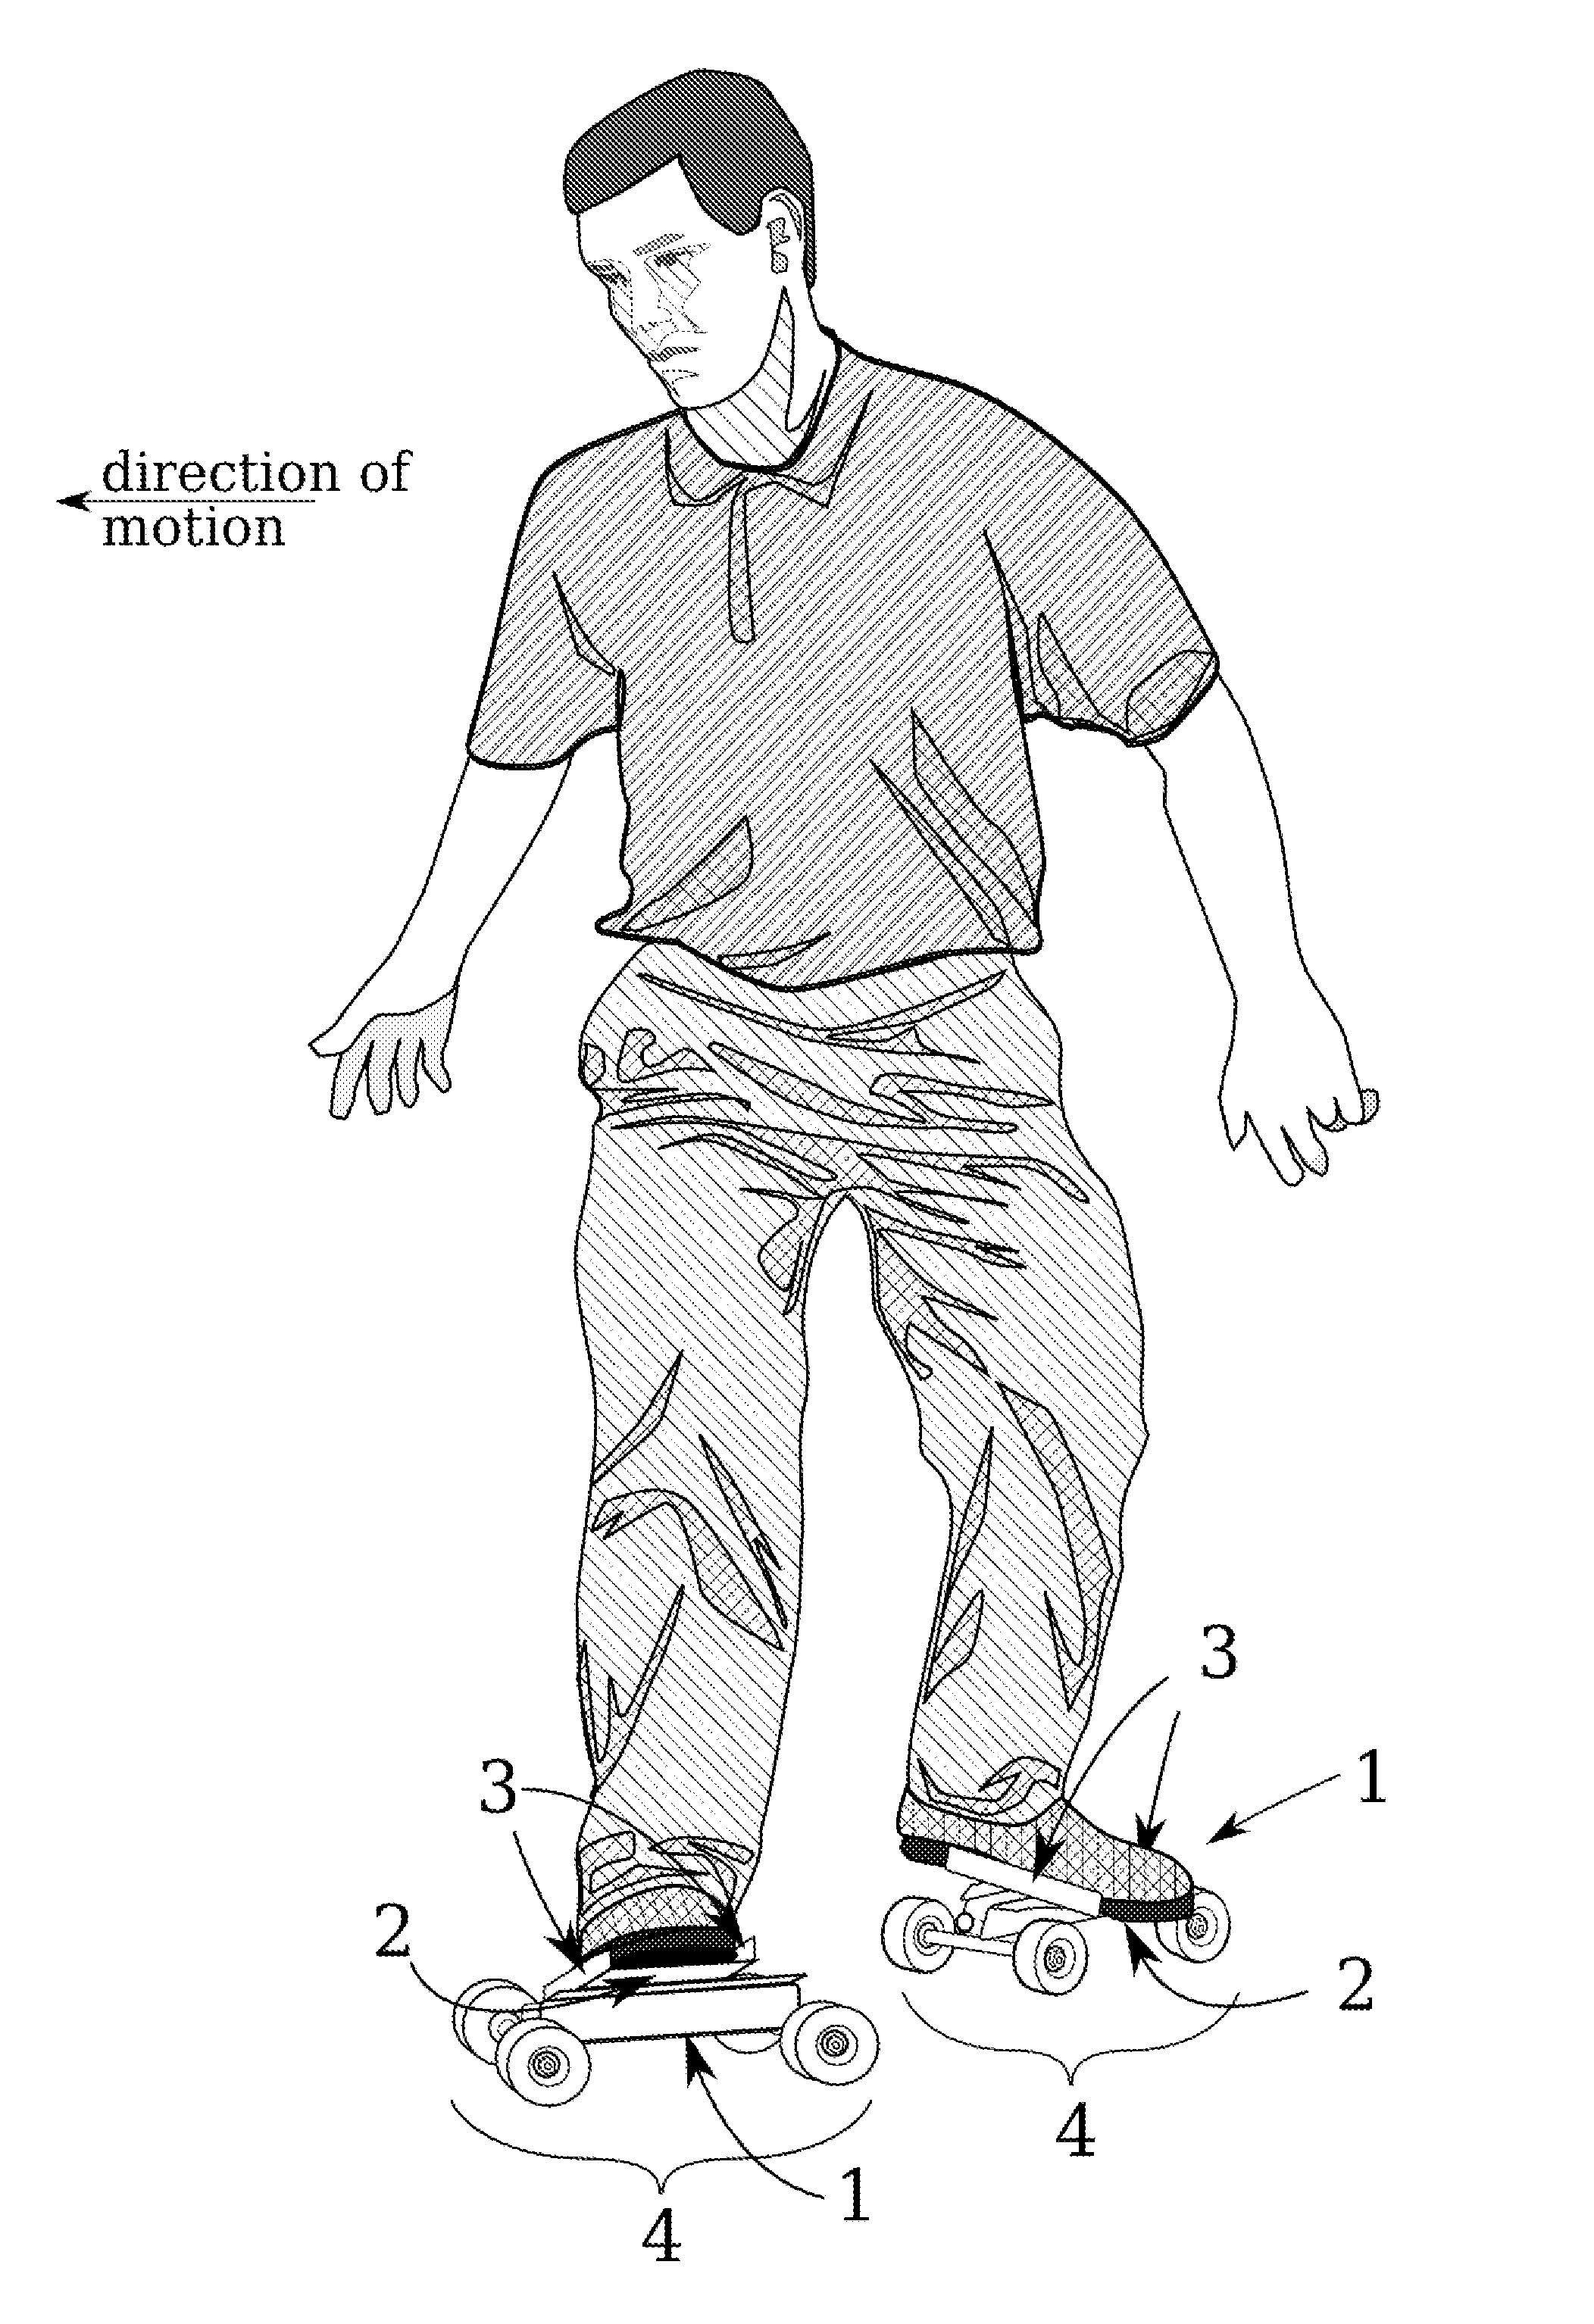 Individual foot-skates for transportation, exercise, and sport